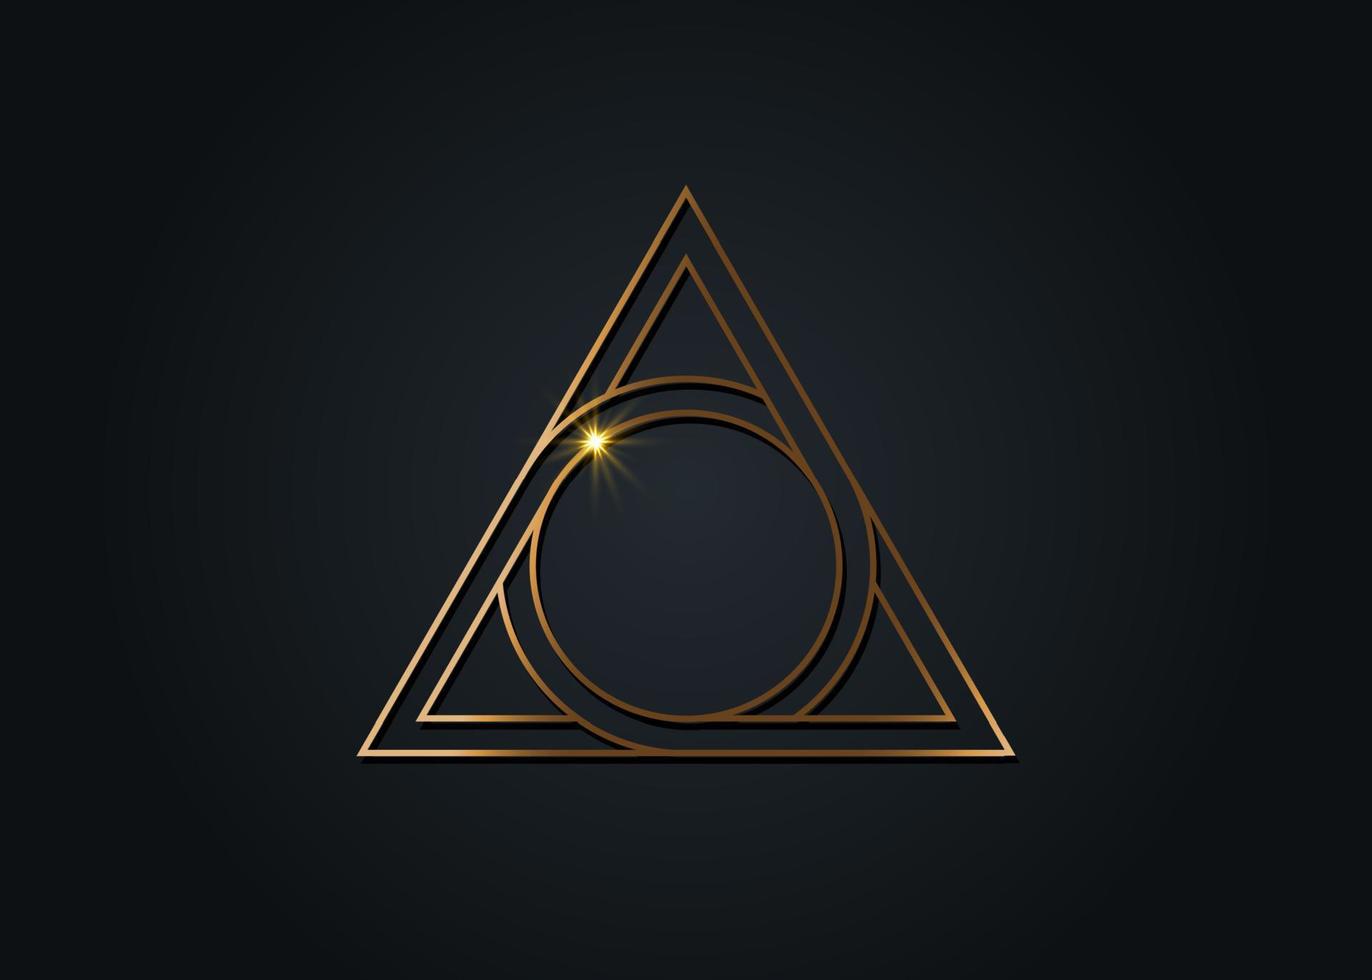 letter A and Letter O, golden logo design, sacred geometrical figure of a circle inscribed in a triangle, gold vector mythological symbol round triangle, isolated on black background